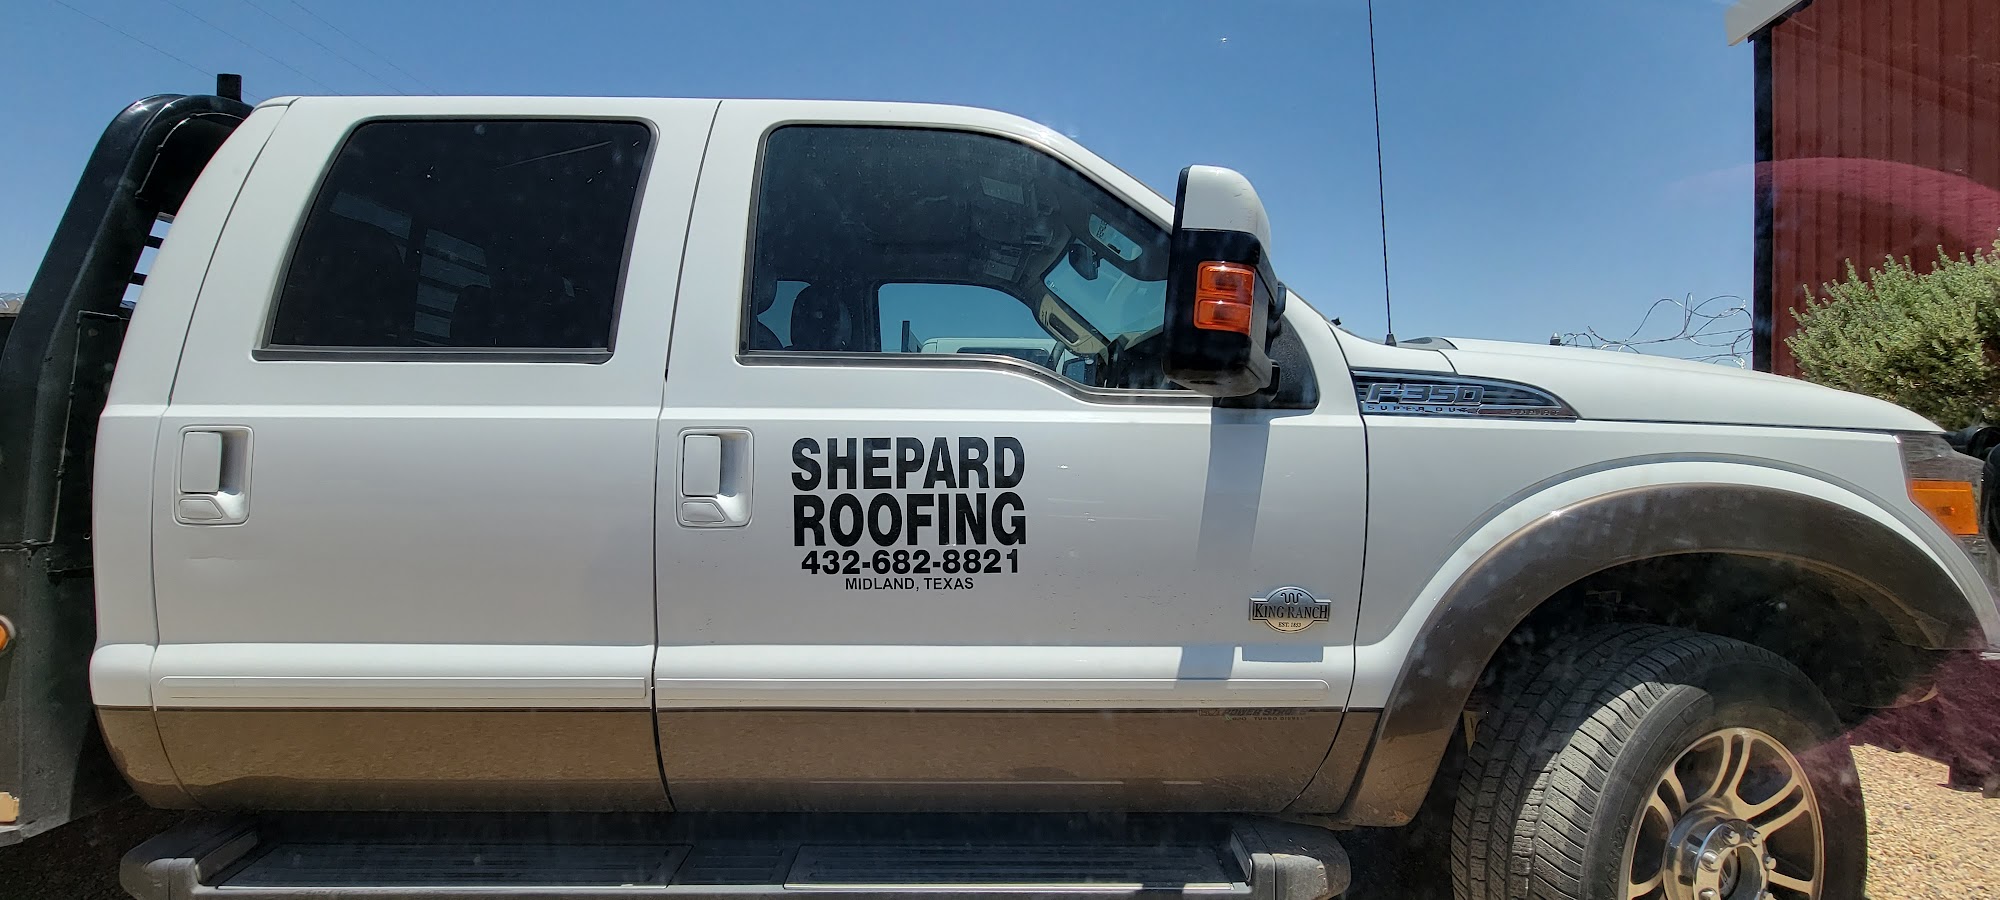 Shepard Roofing Corp